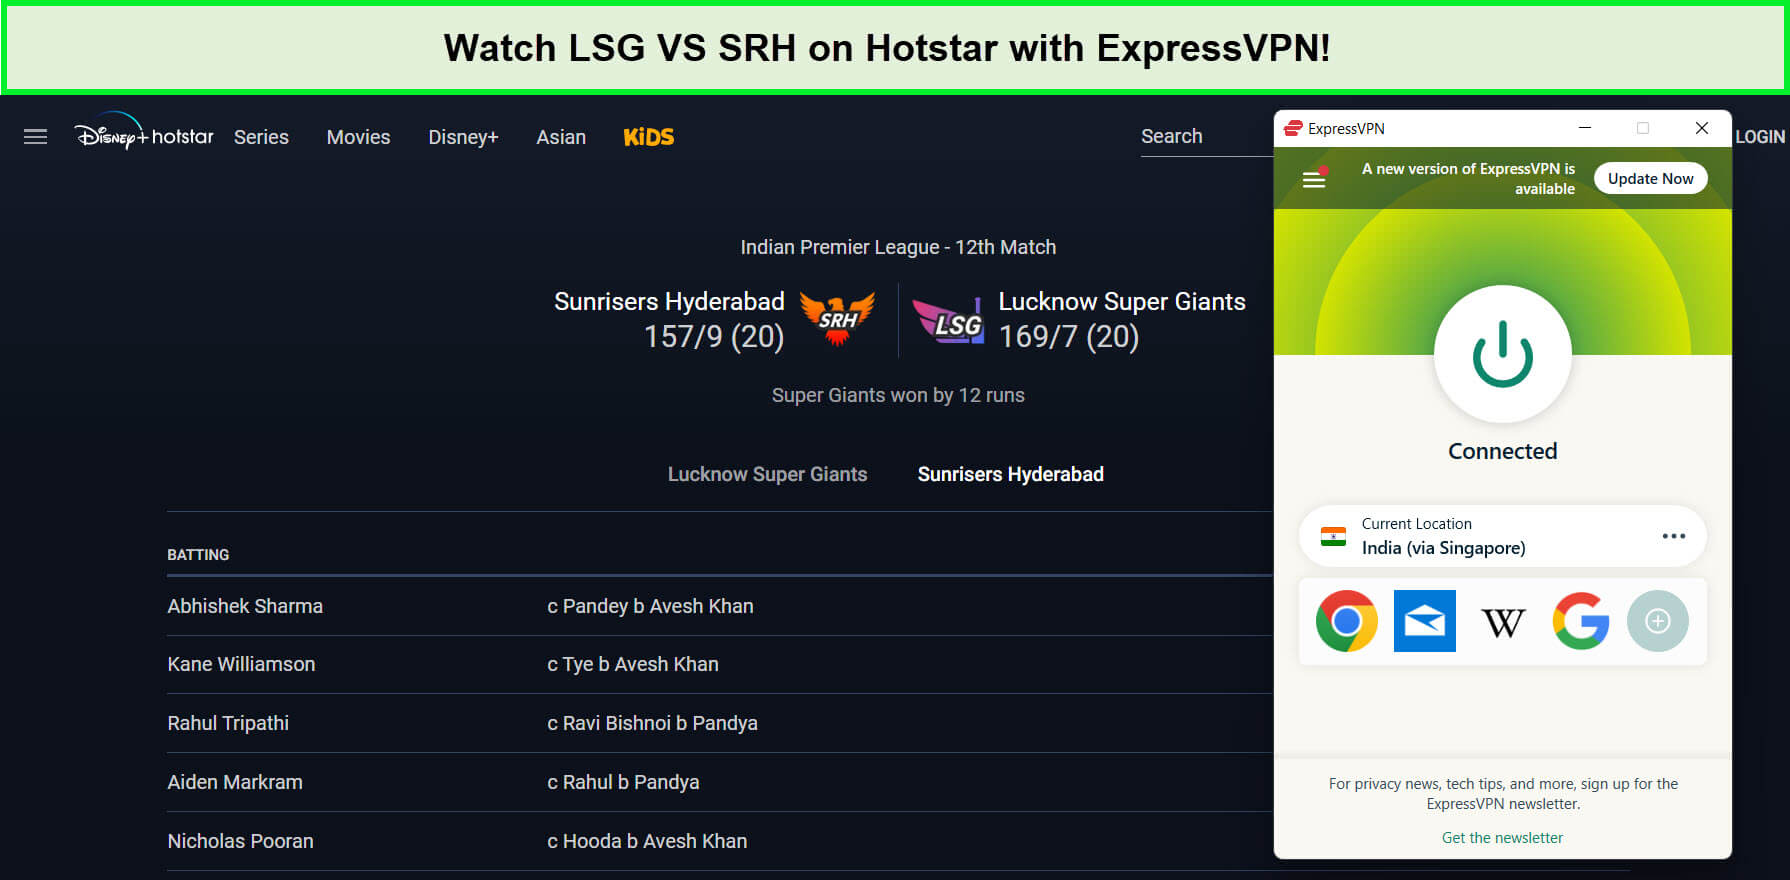 watch-lucknow-super-giants-vs-sunirisers-hyderabad-in-Germany-on-hotstar-with-expressvpn